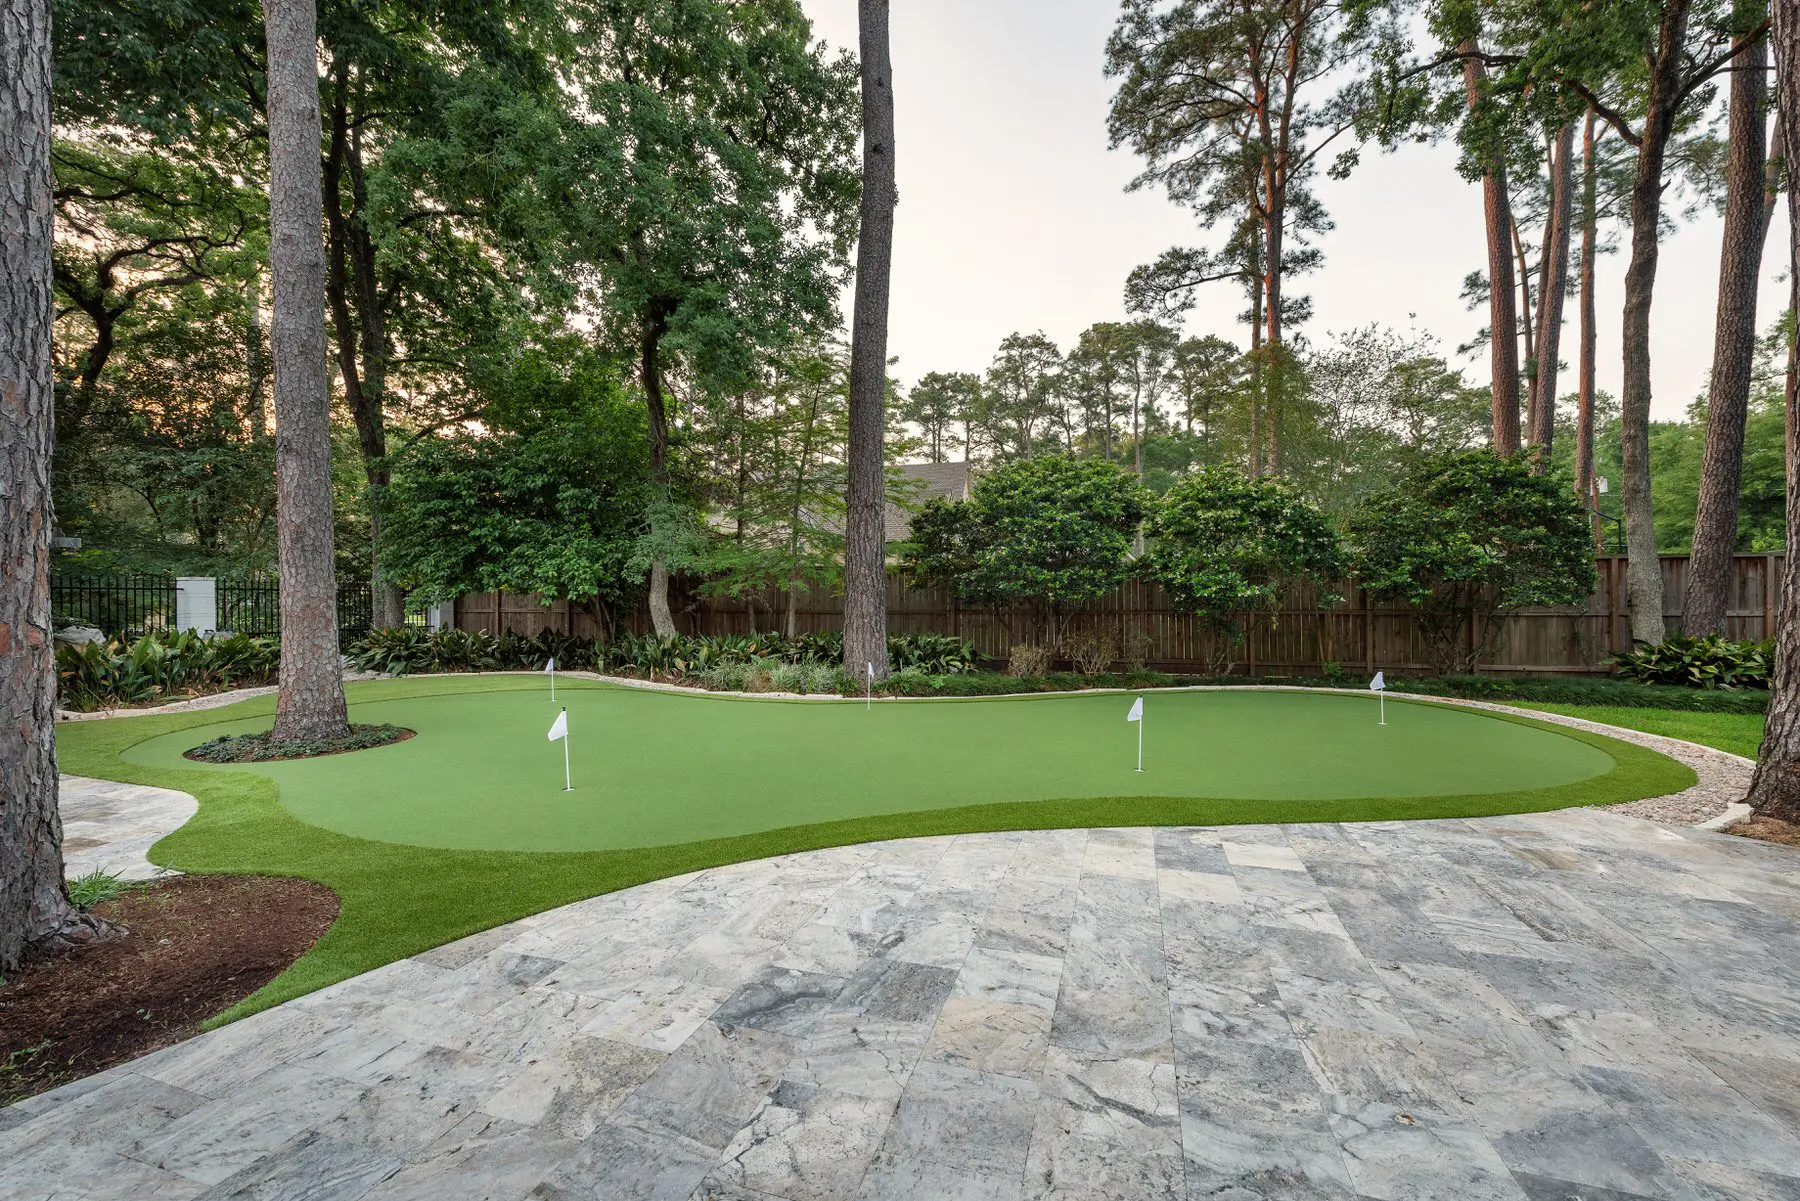 putting green installed by professional landscapers